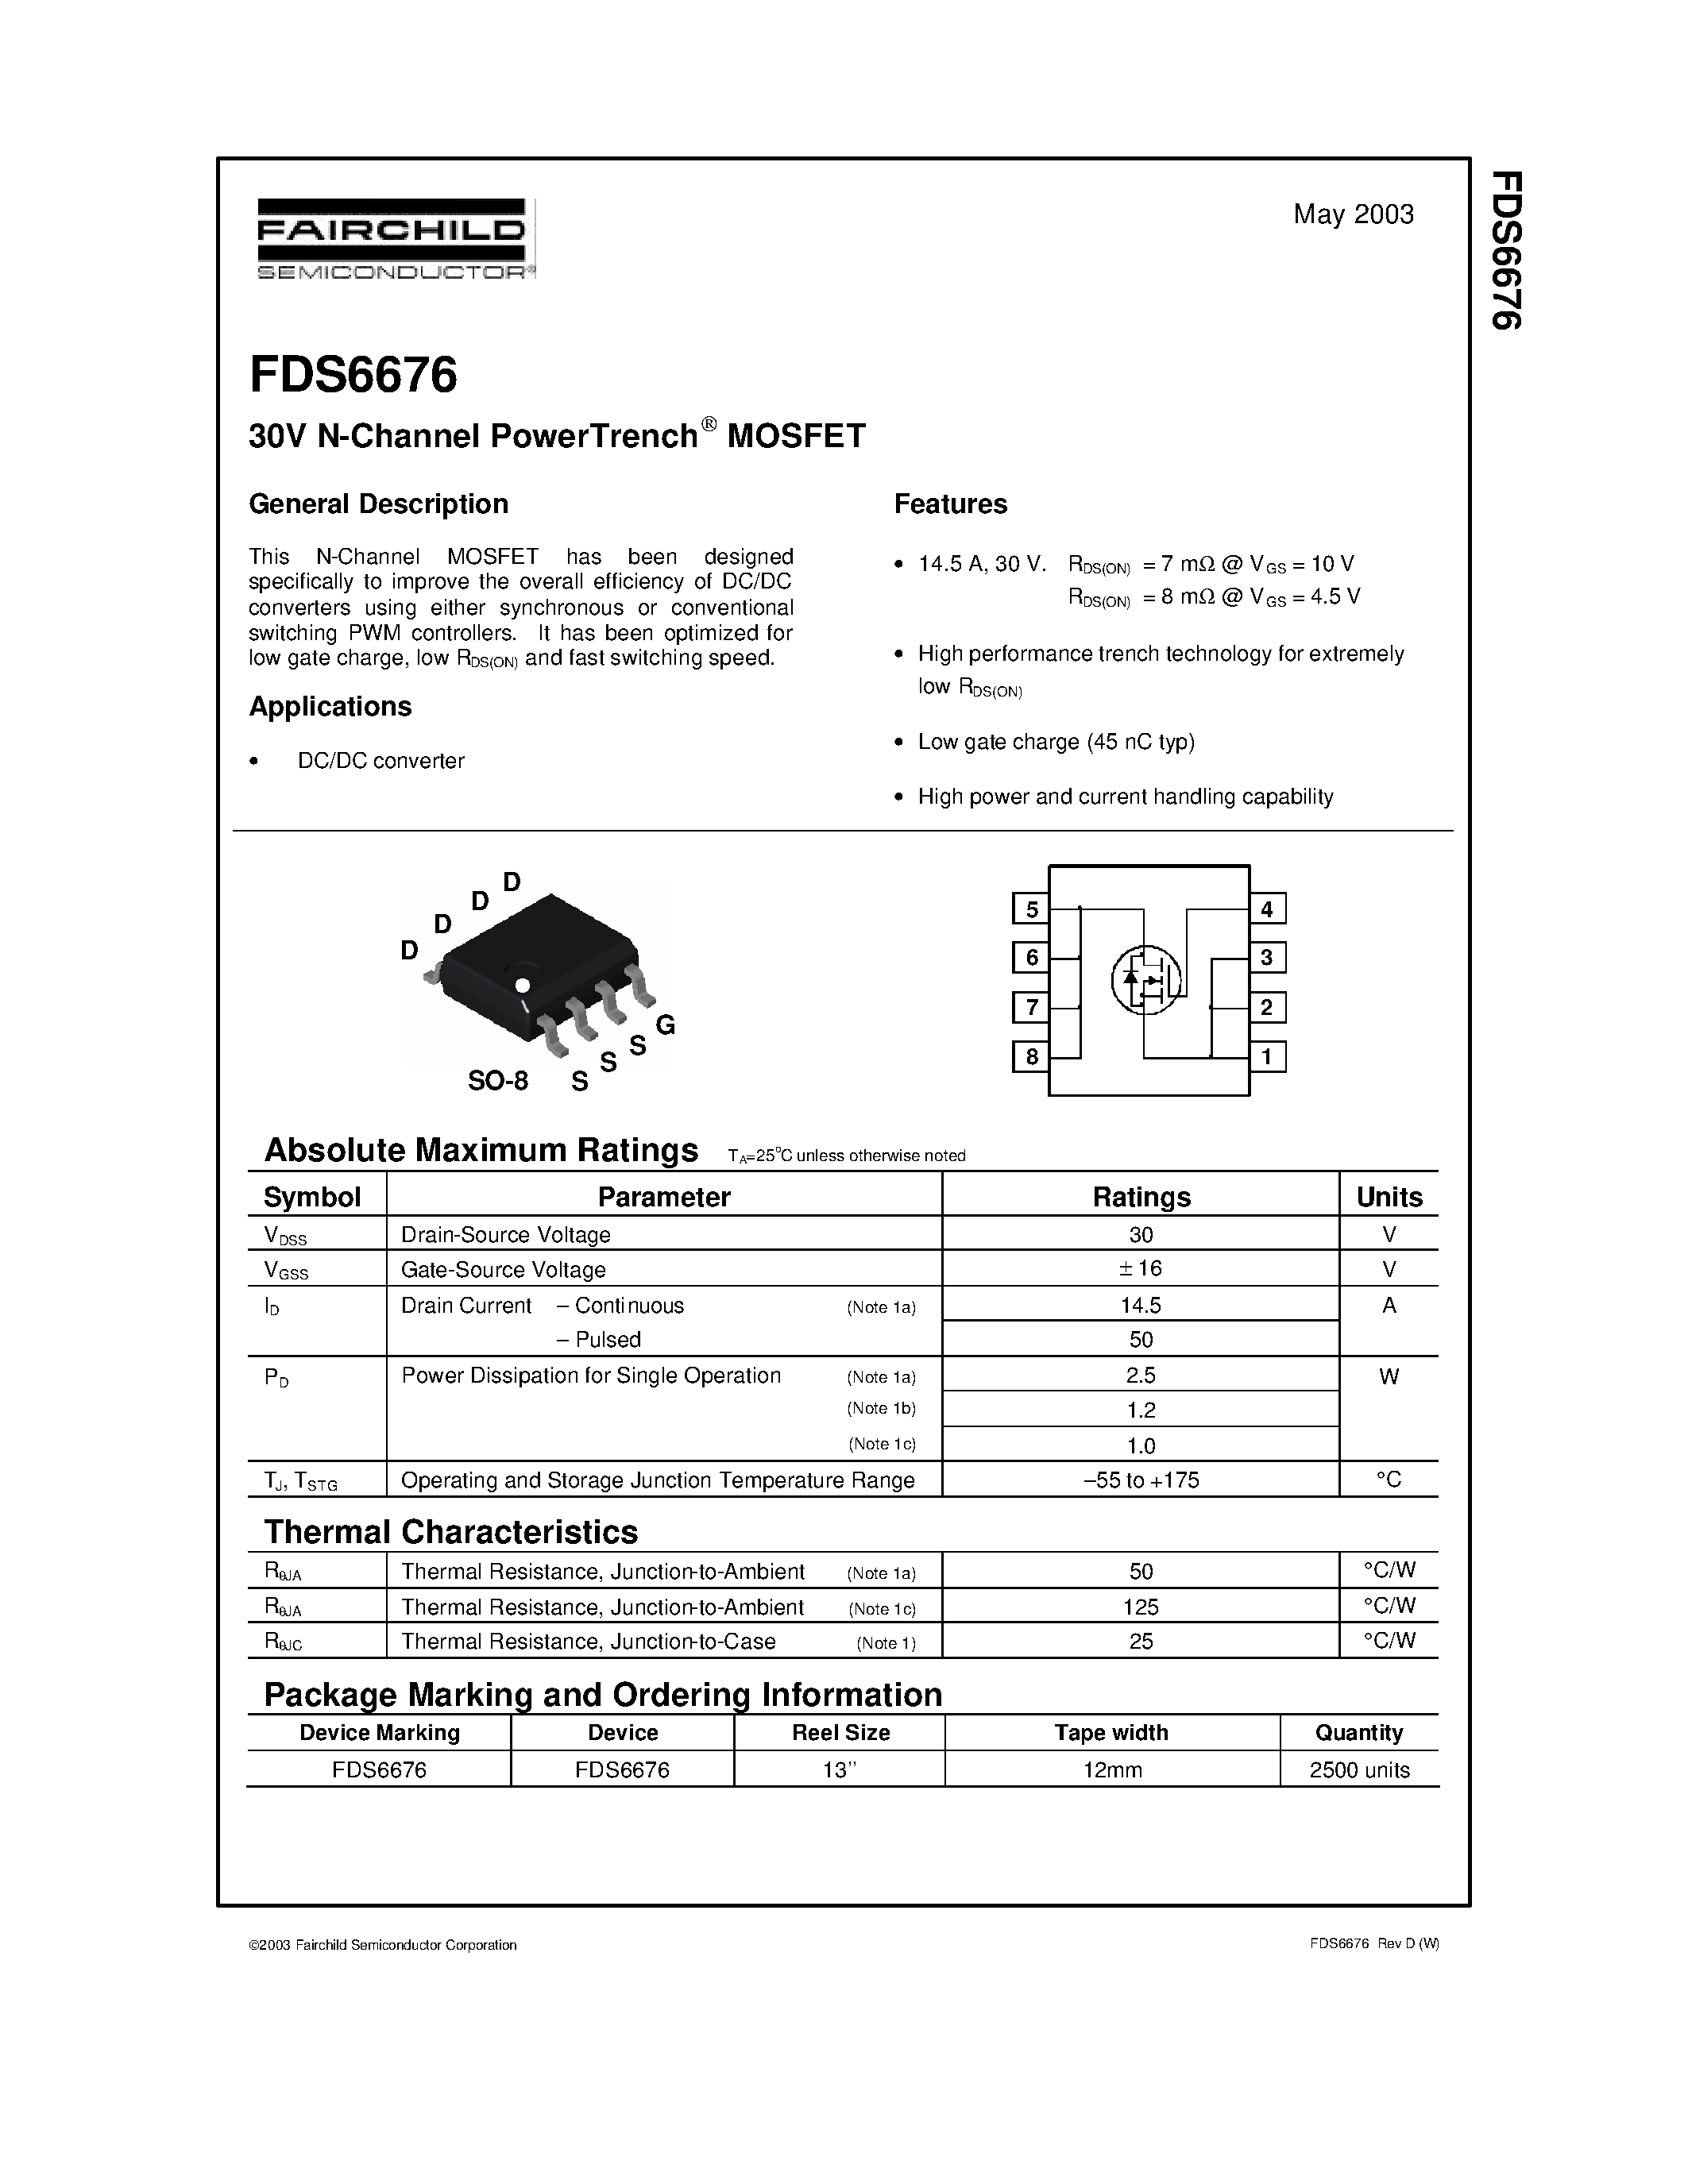 Даташит FDS6676 - 30V N-Channel PowerTrench MOSFET страница 1